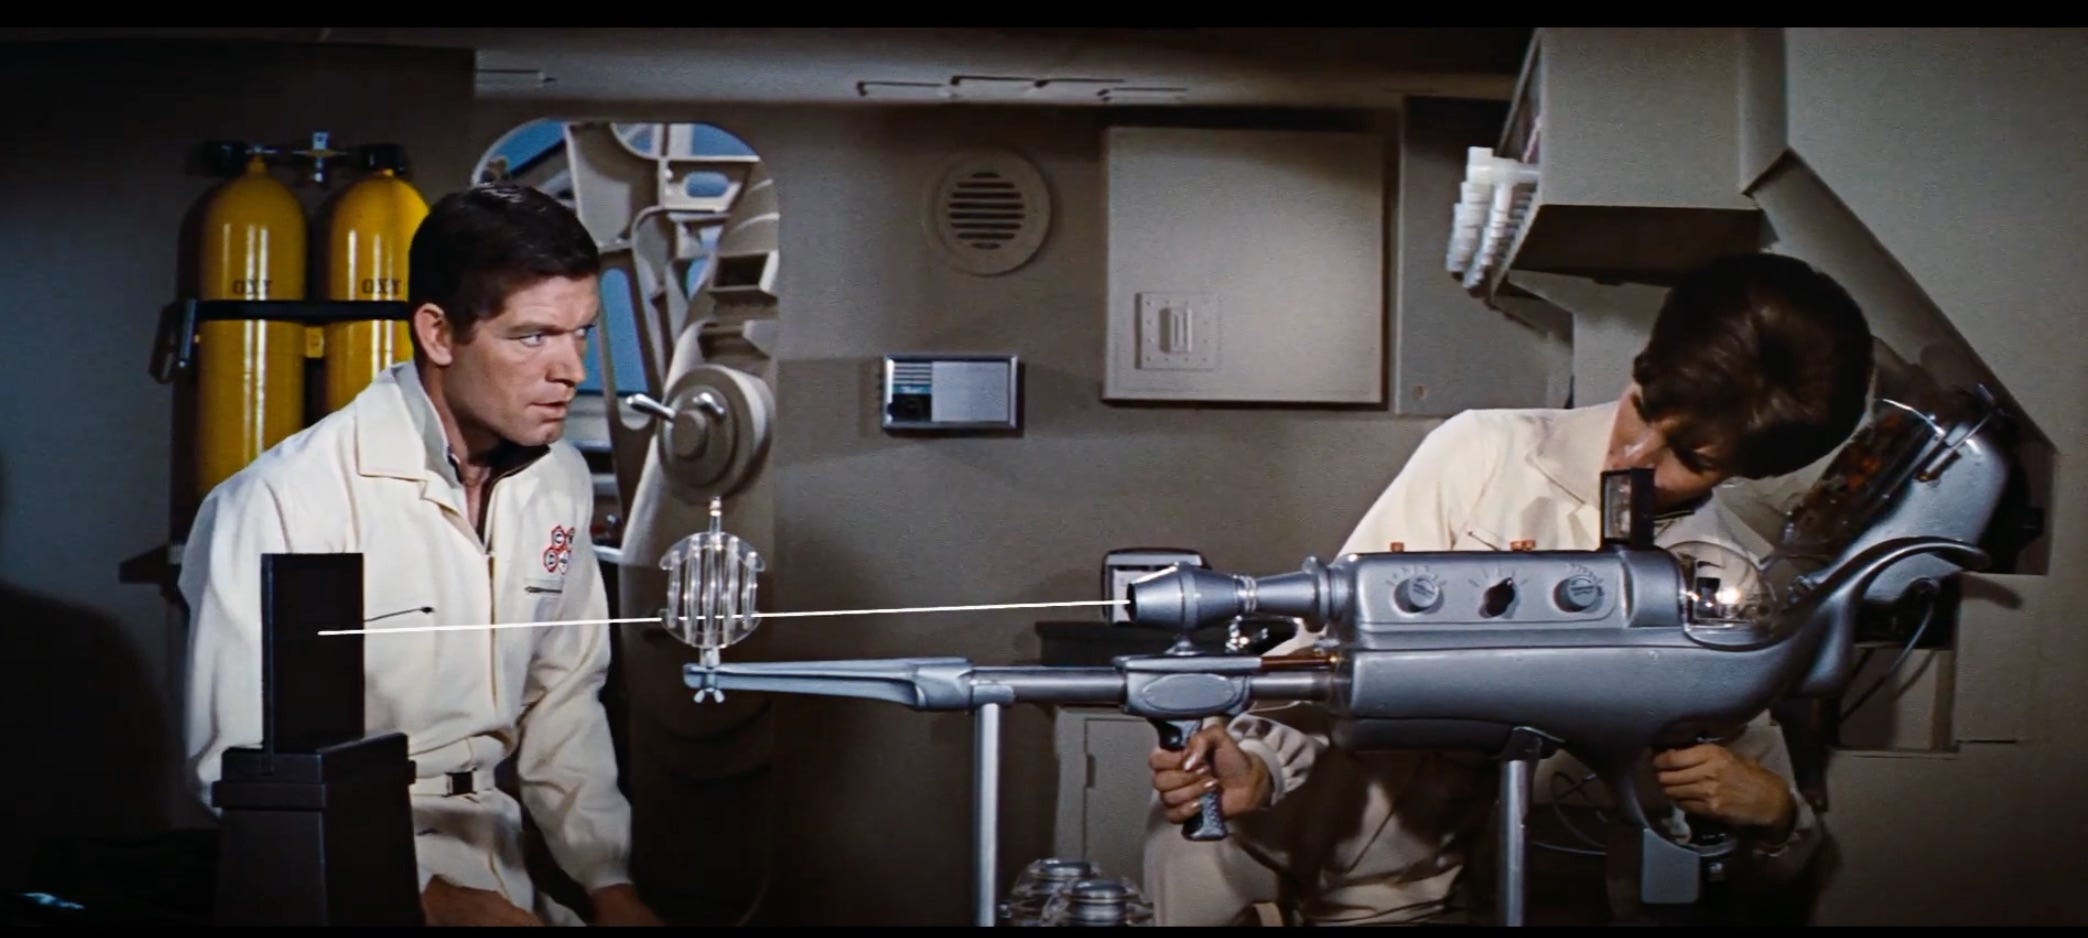 RIP Raquel Welch, The Hottest Girl Ever With a Laser Gun